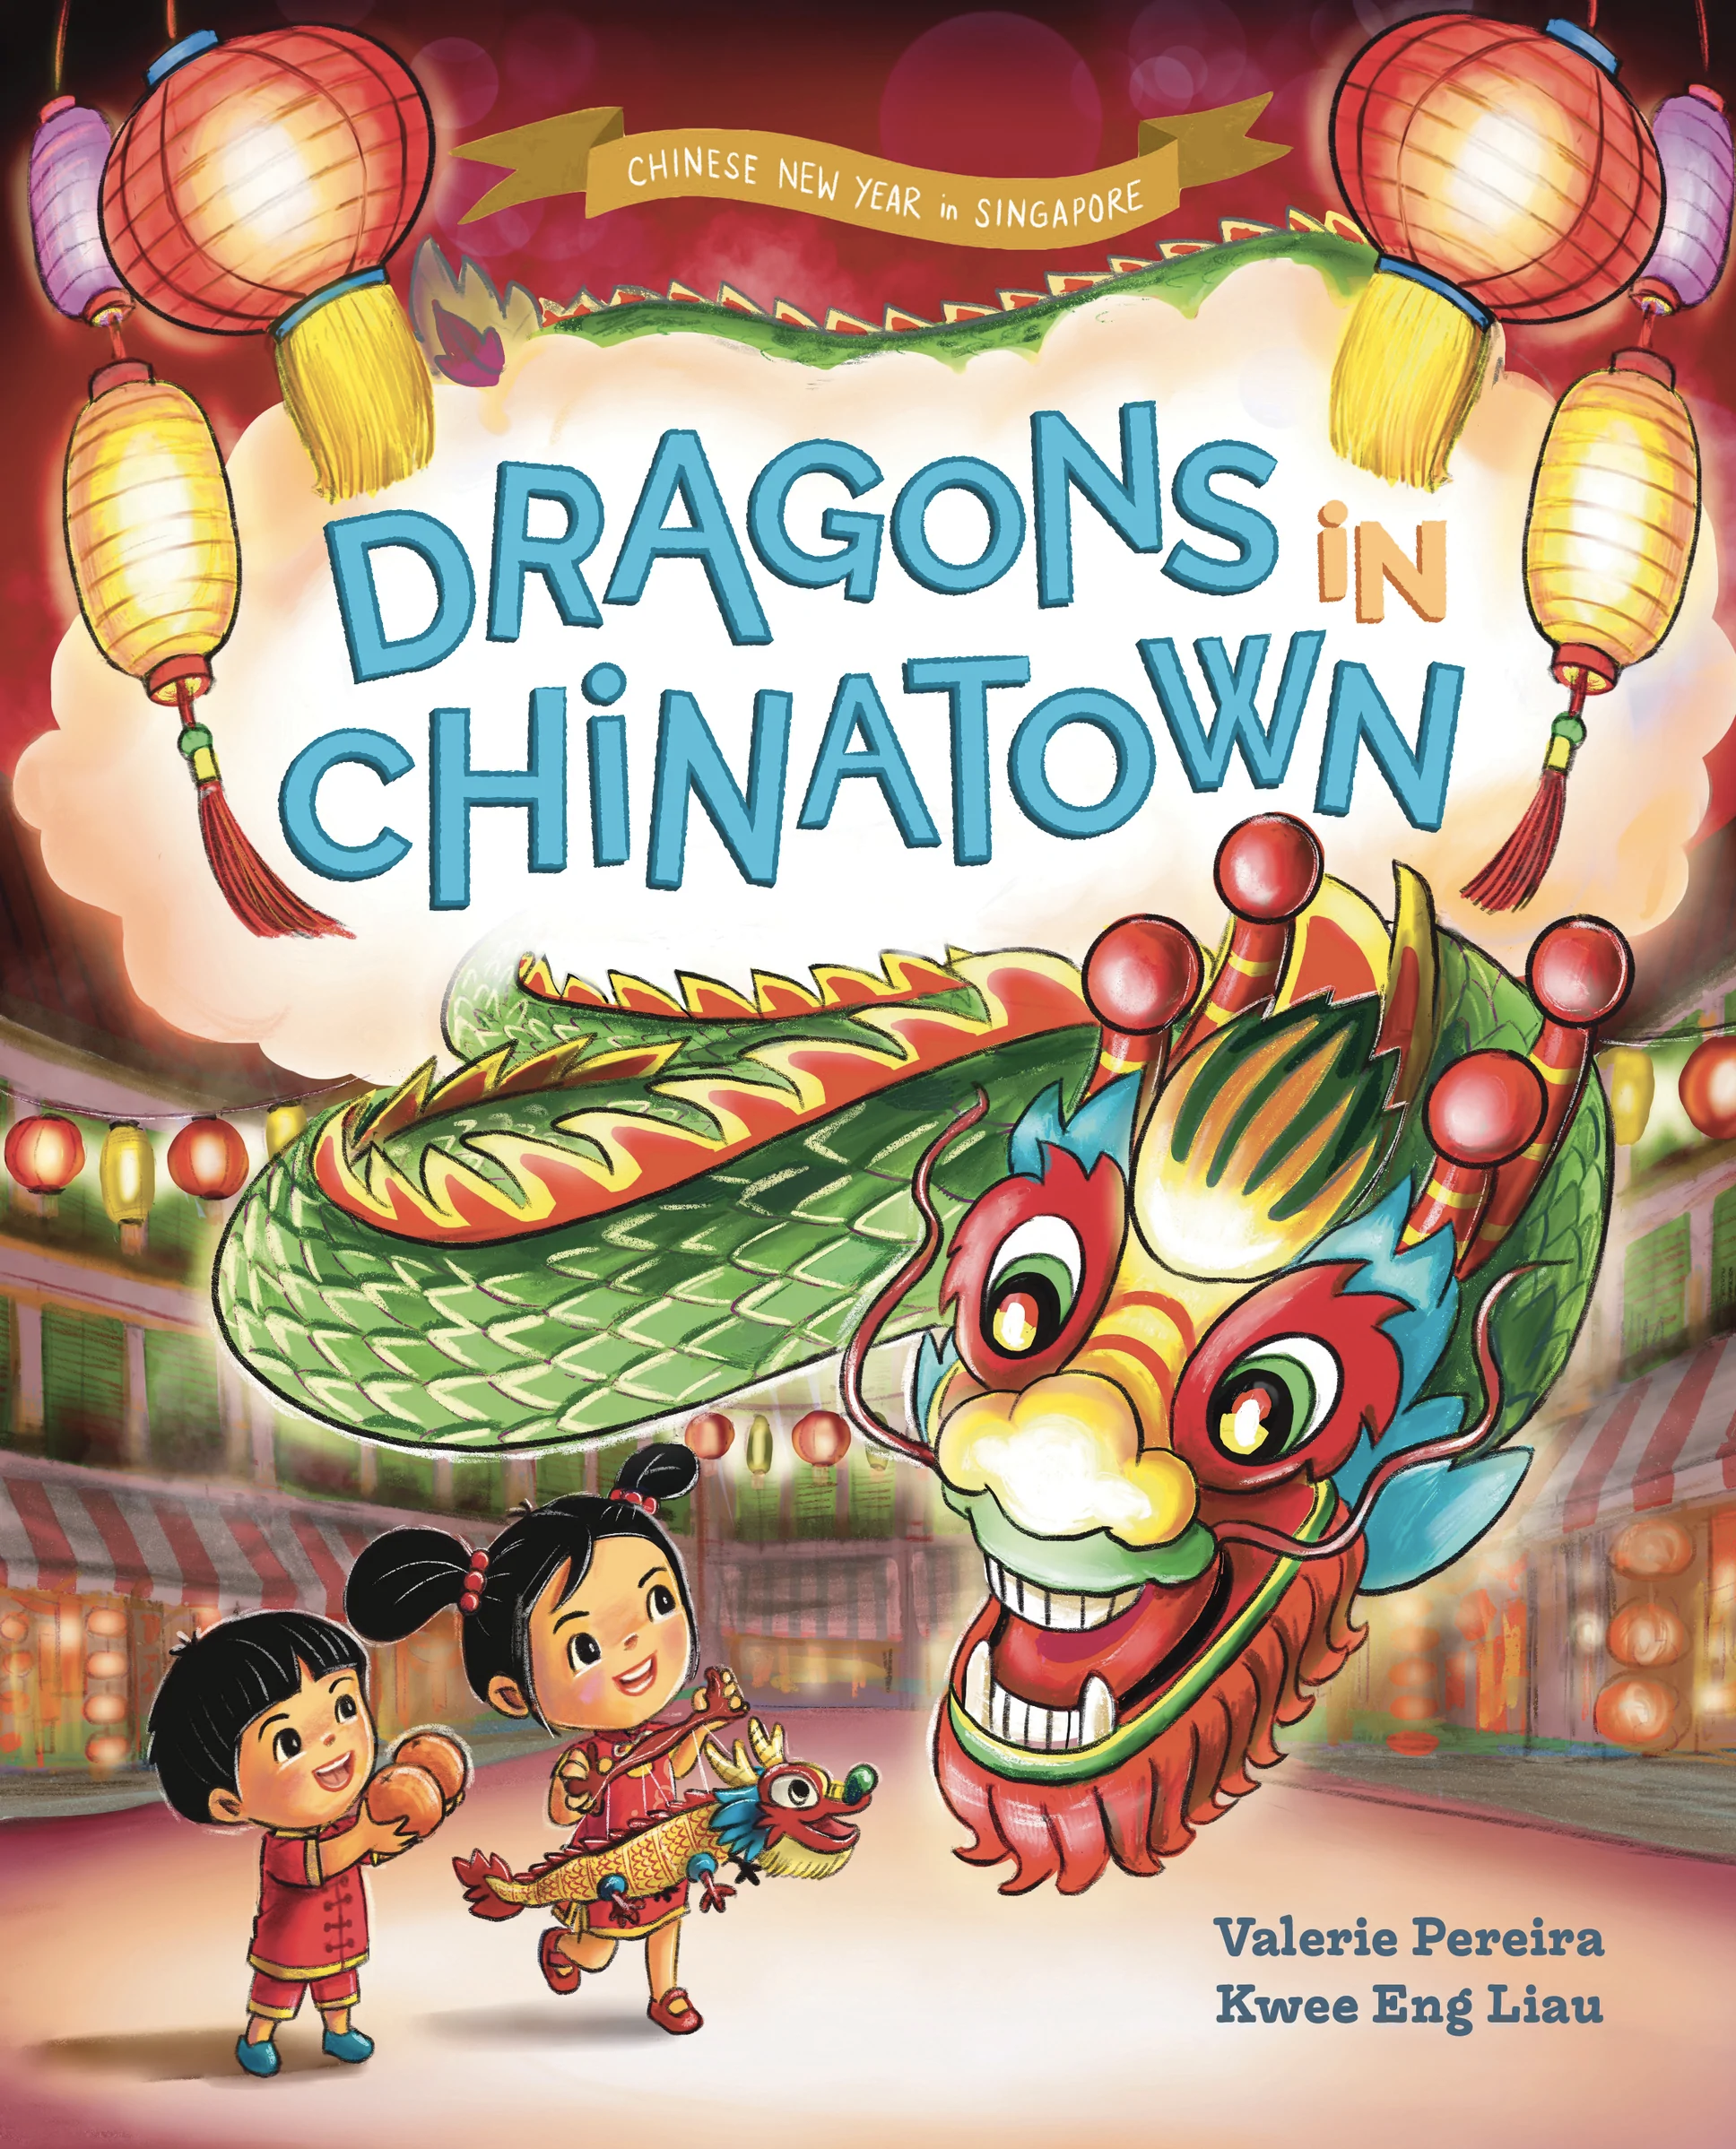 Chinese New Year in Singapore: Dragons In Chinatown